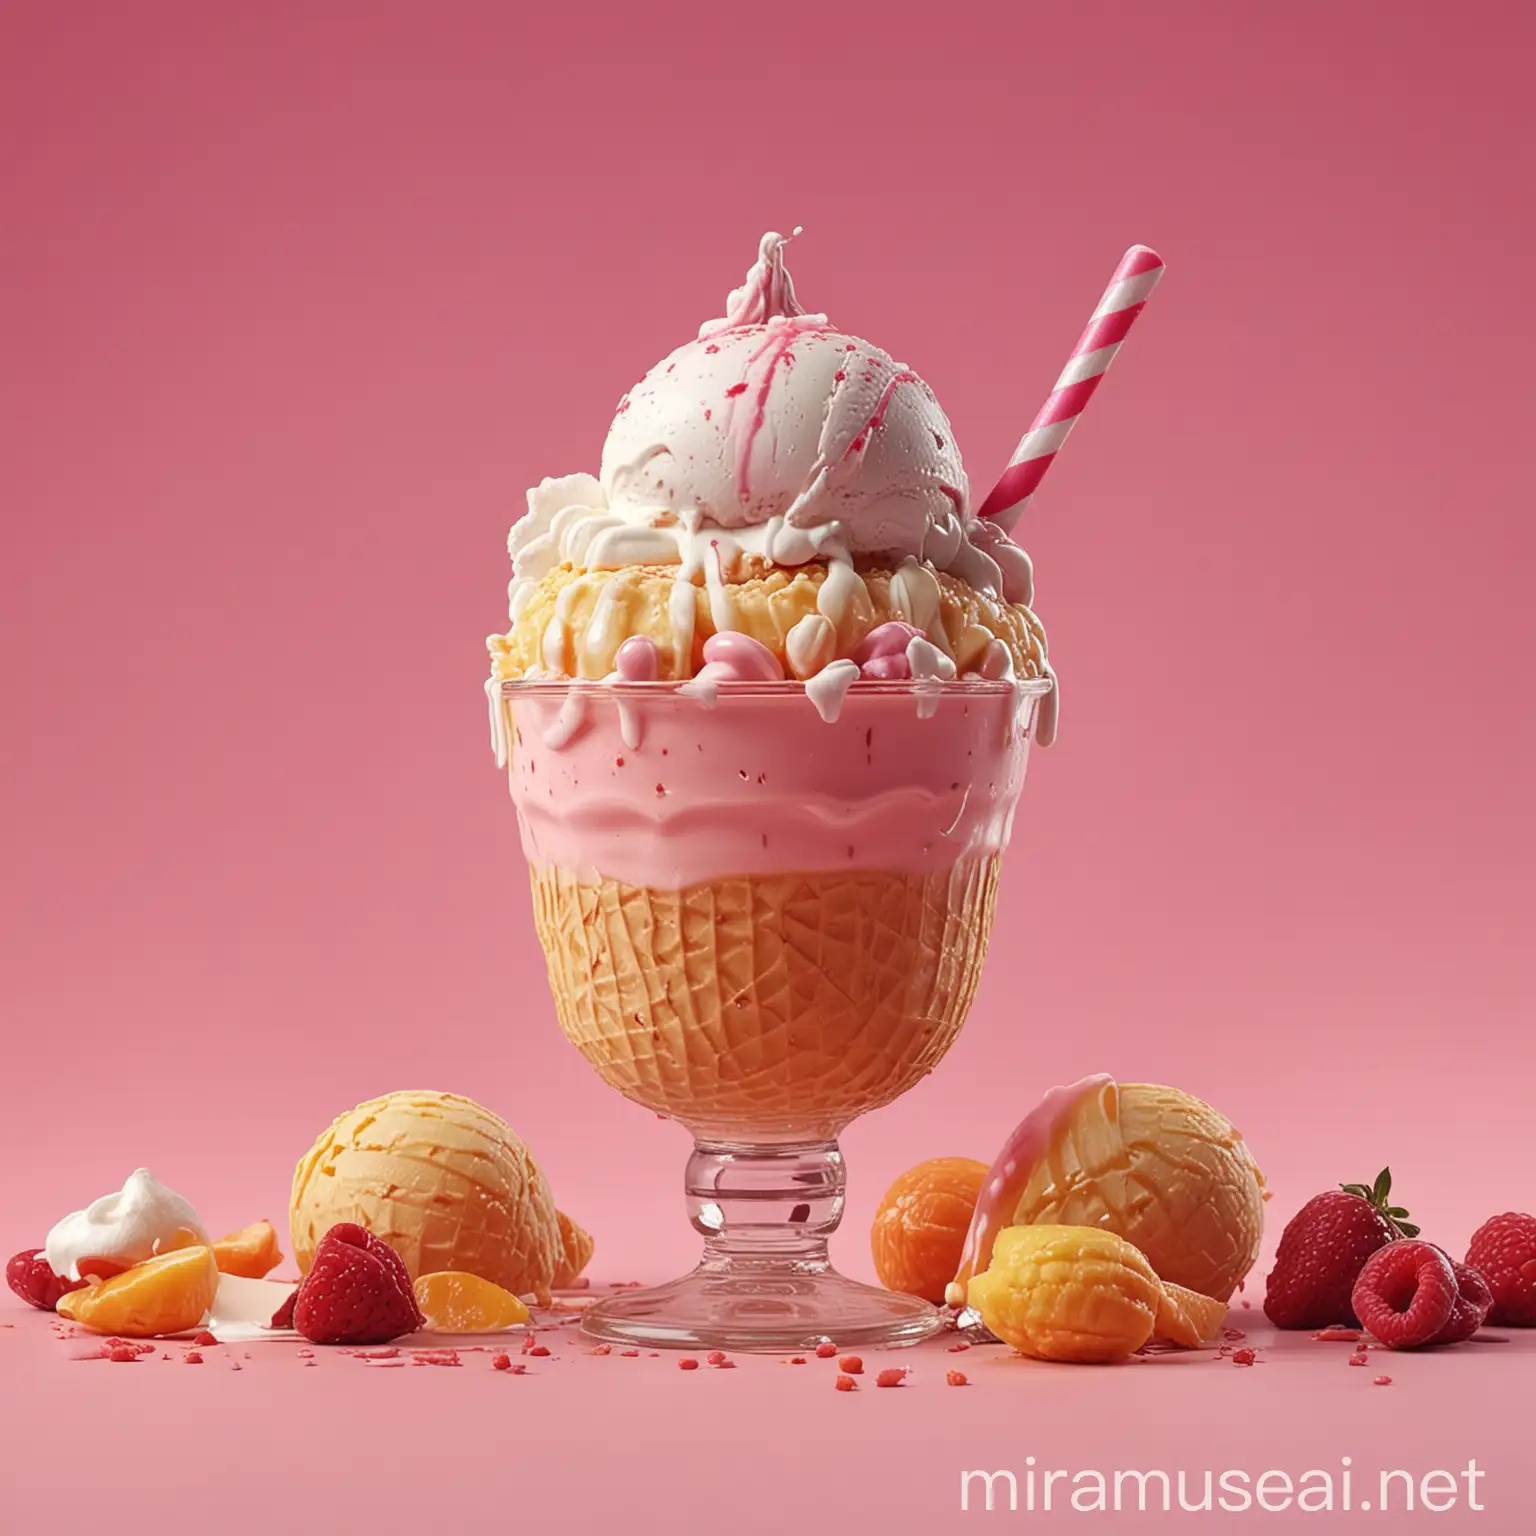 Colorful Ice Cream and Confectionery Dessert on Pink Background